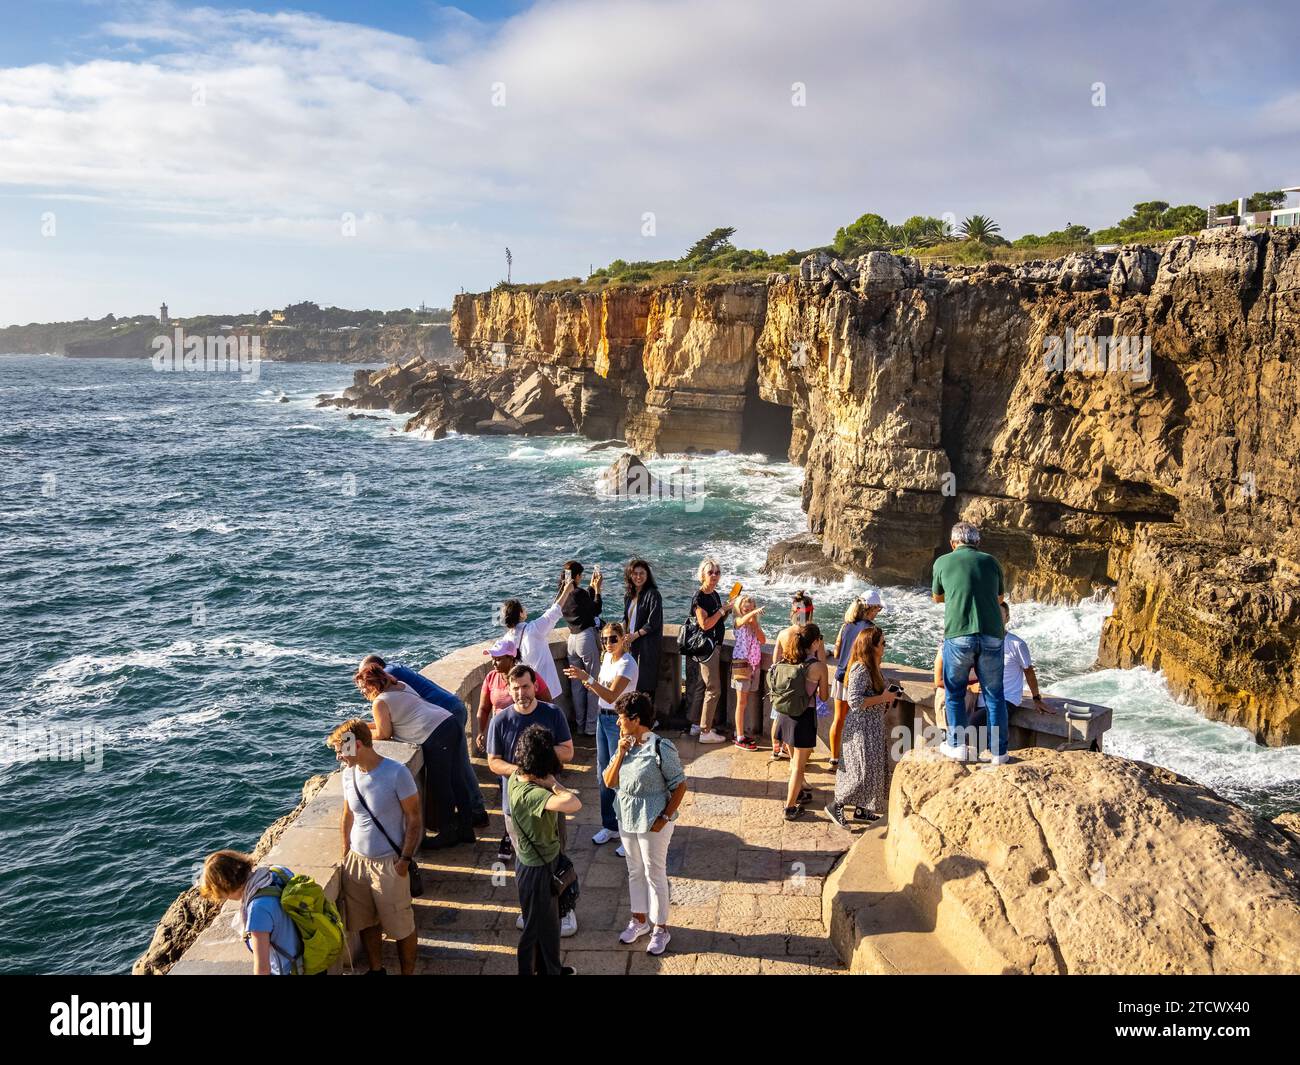 Viewpoint at Boca do Inferno, which translates to “Mouth of (or the Gate to) Hell on the Atlantic Coast in Cascais Portugal Stock Photo